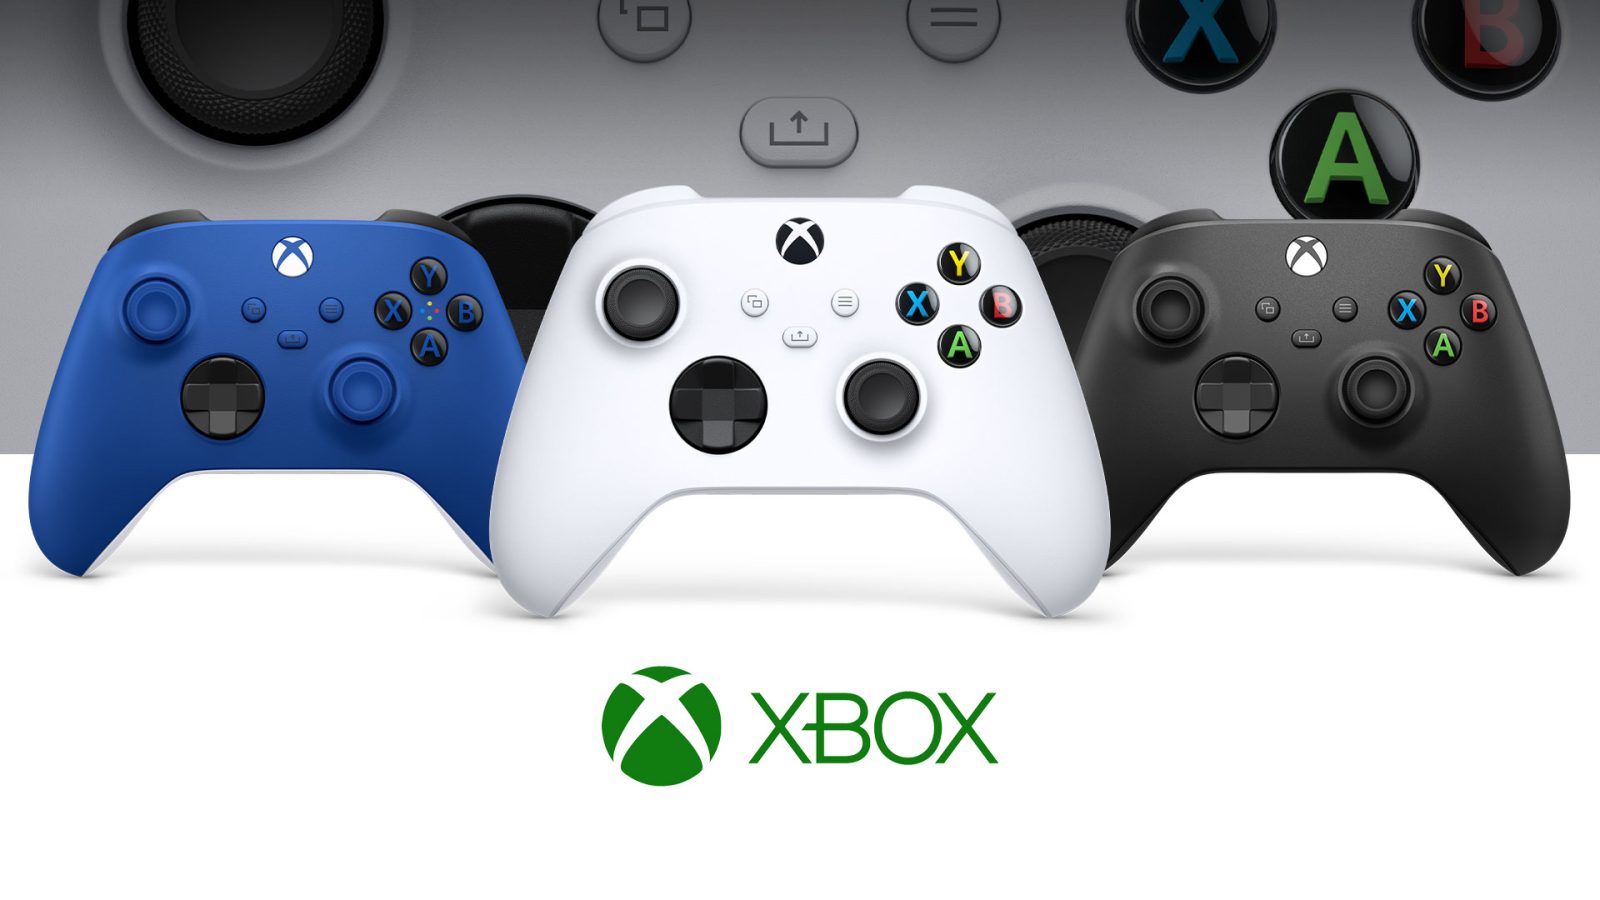 New Xbox device to compete with Apple TV - 9to5Mac